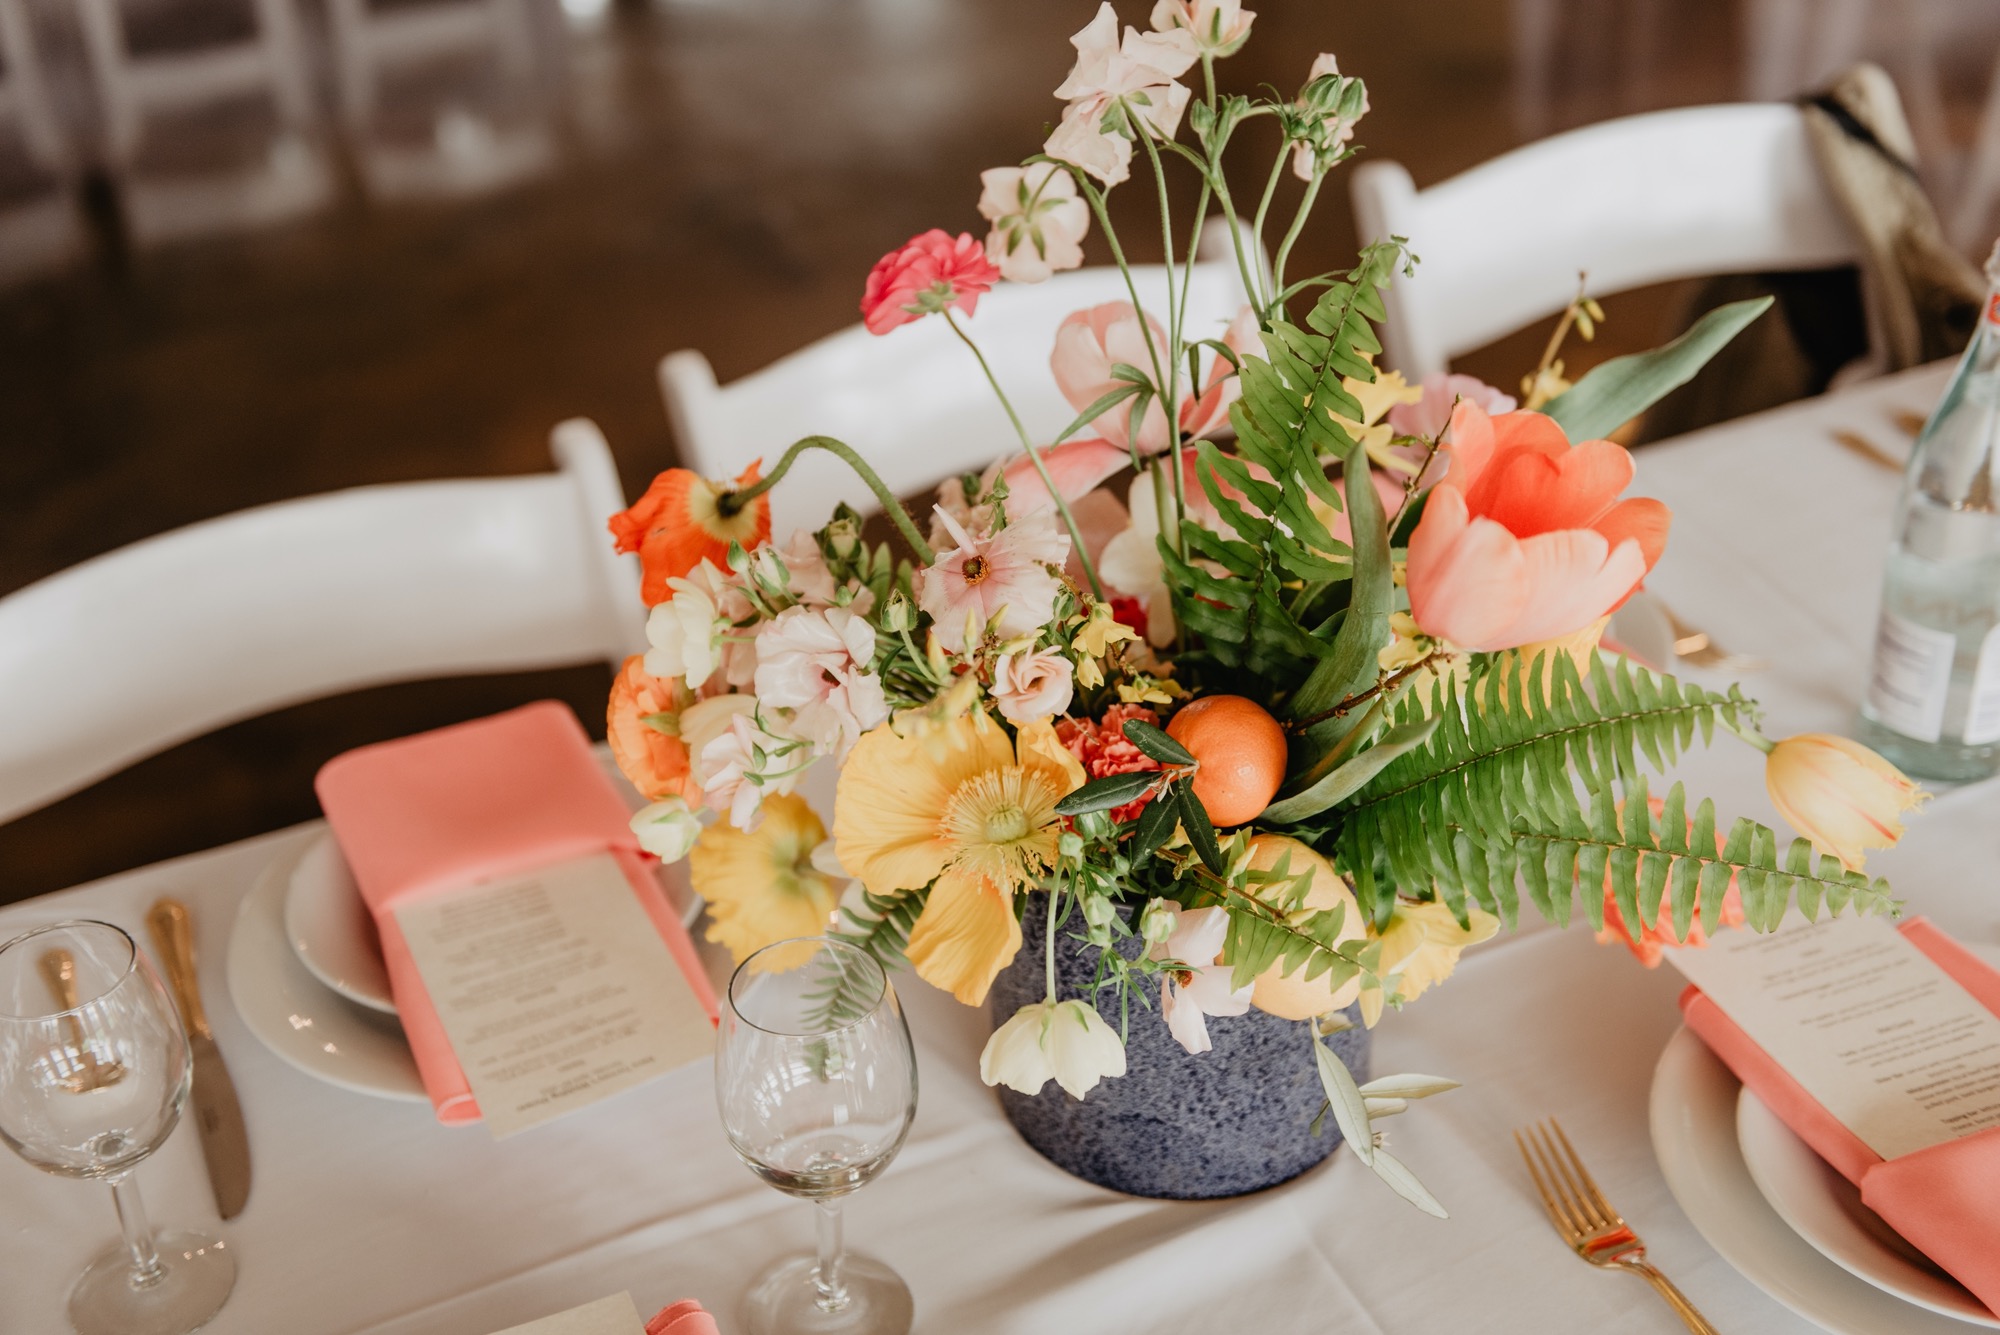 How to Plan an Event When You're Not an Event Planner